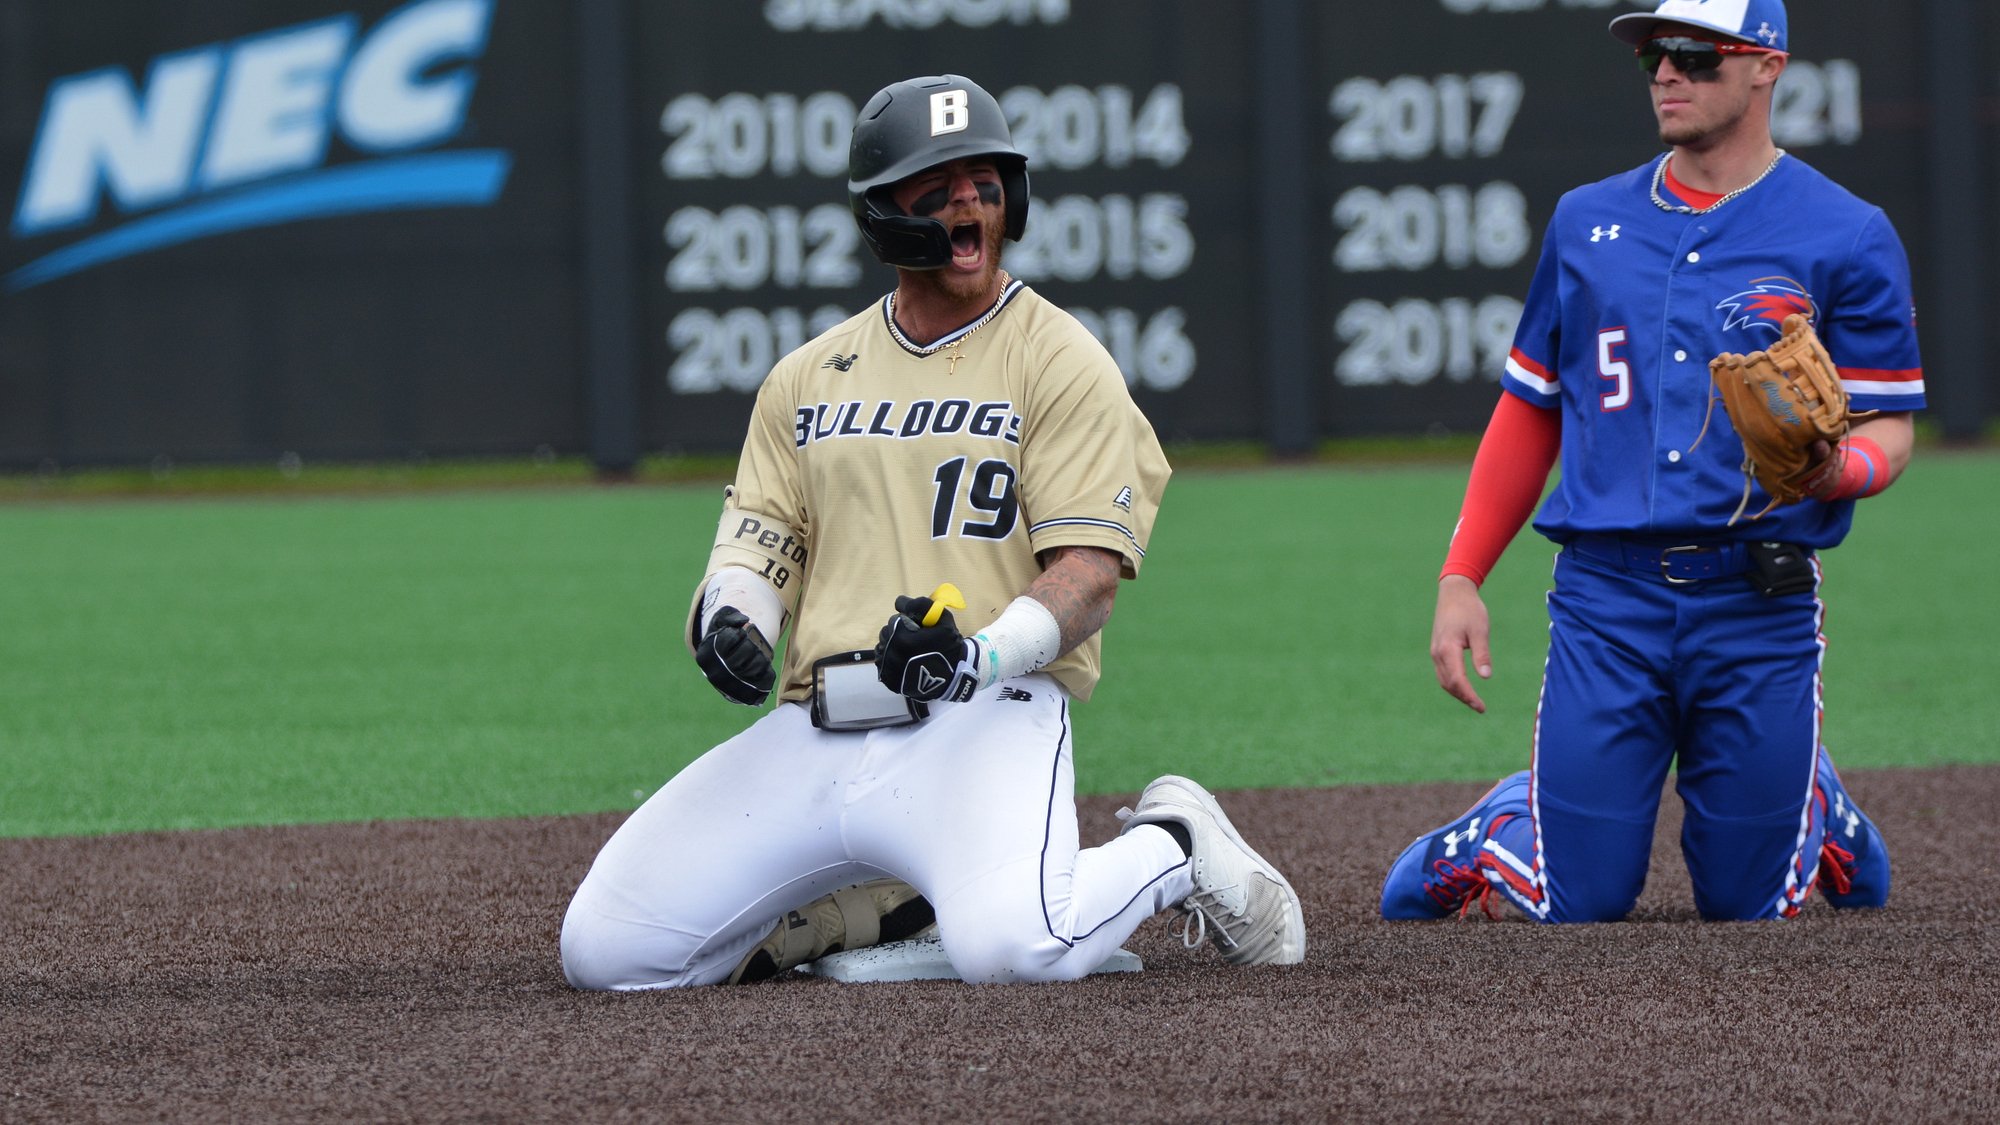 Grady's walk-off completes late rally as Bryant wins series vs UML